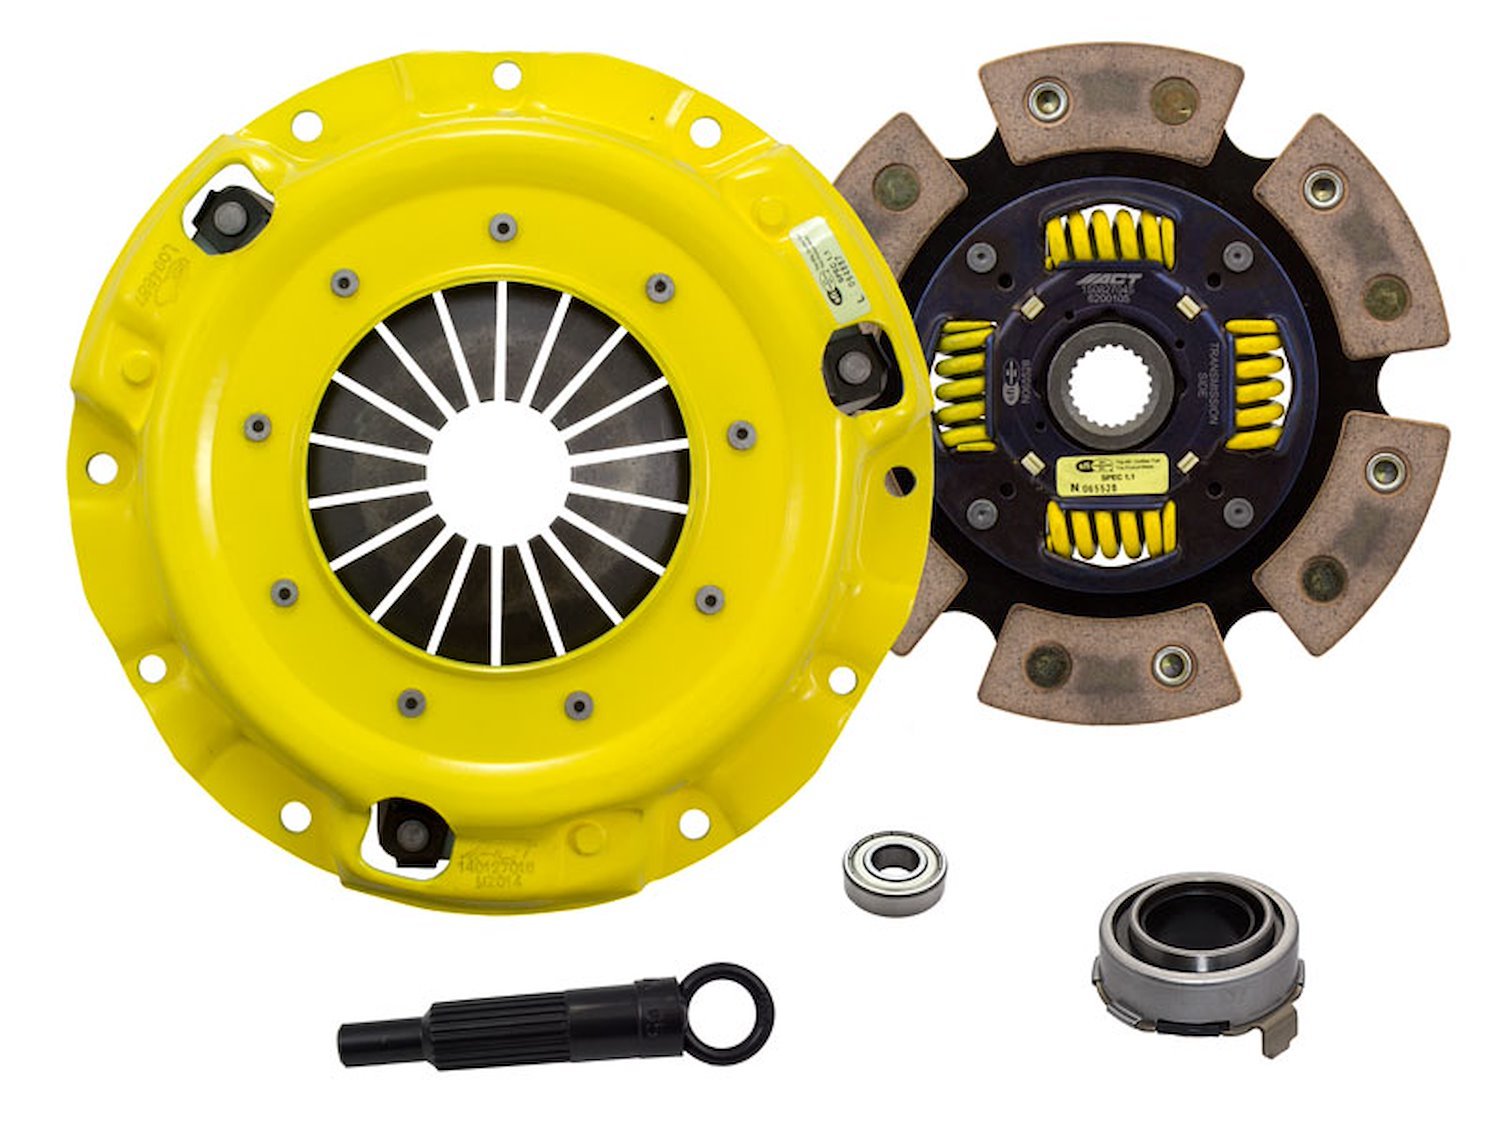 HD/Race Sprung 6-Pad Transmission Clutch Kit Fits Select Ford/Lincoln/Mercury/Mazda